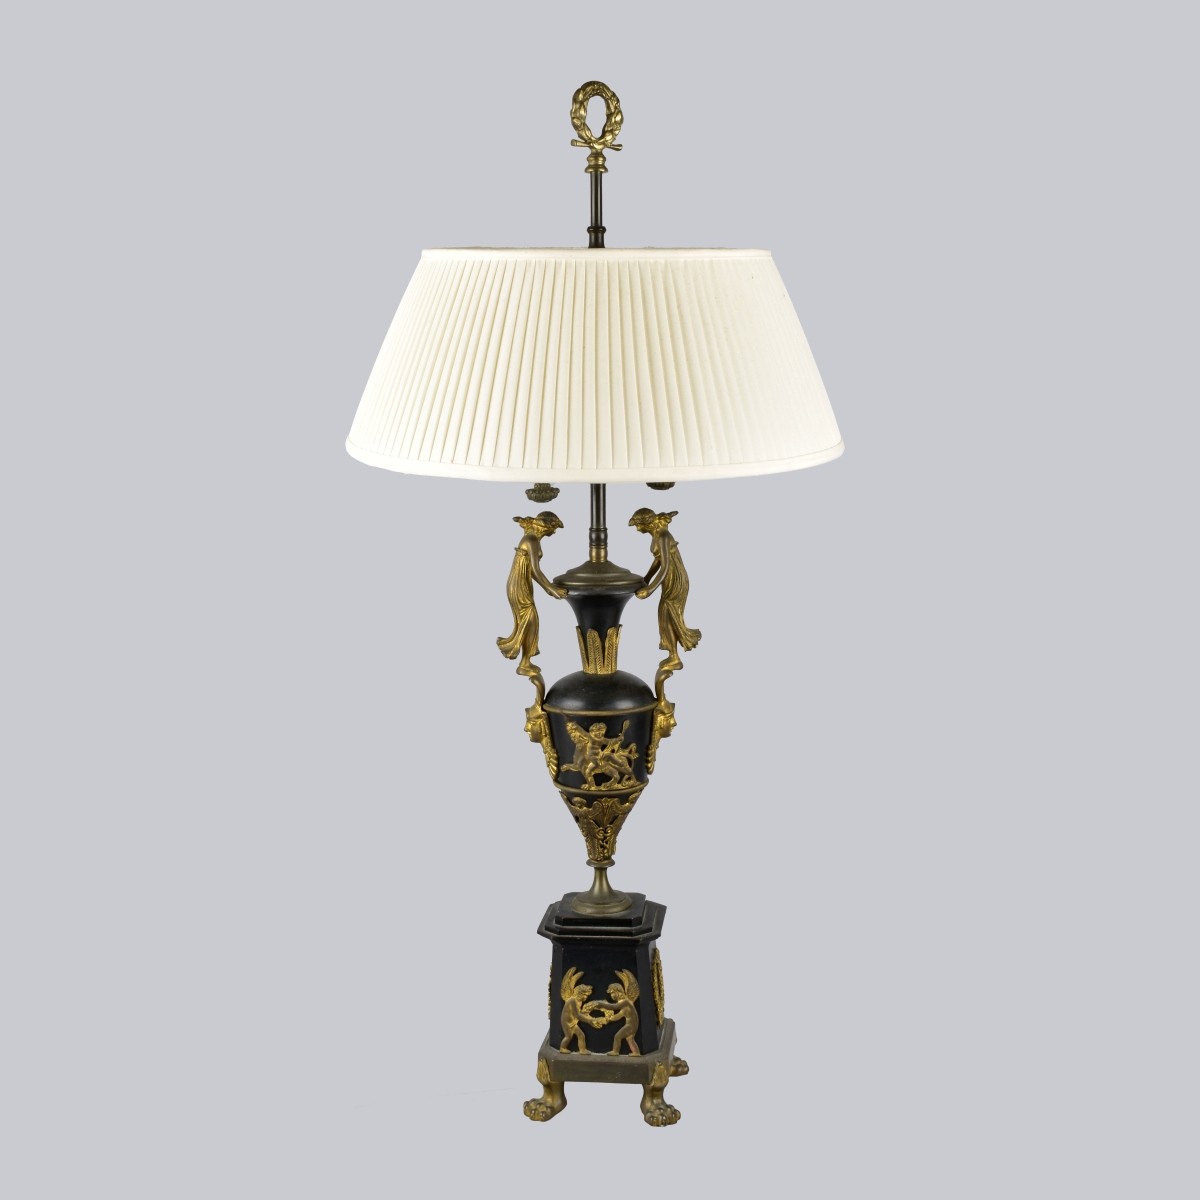 Antique French Empire Style Lamp